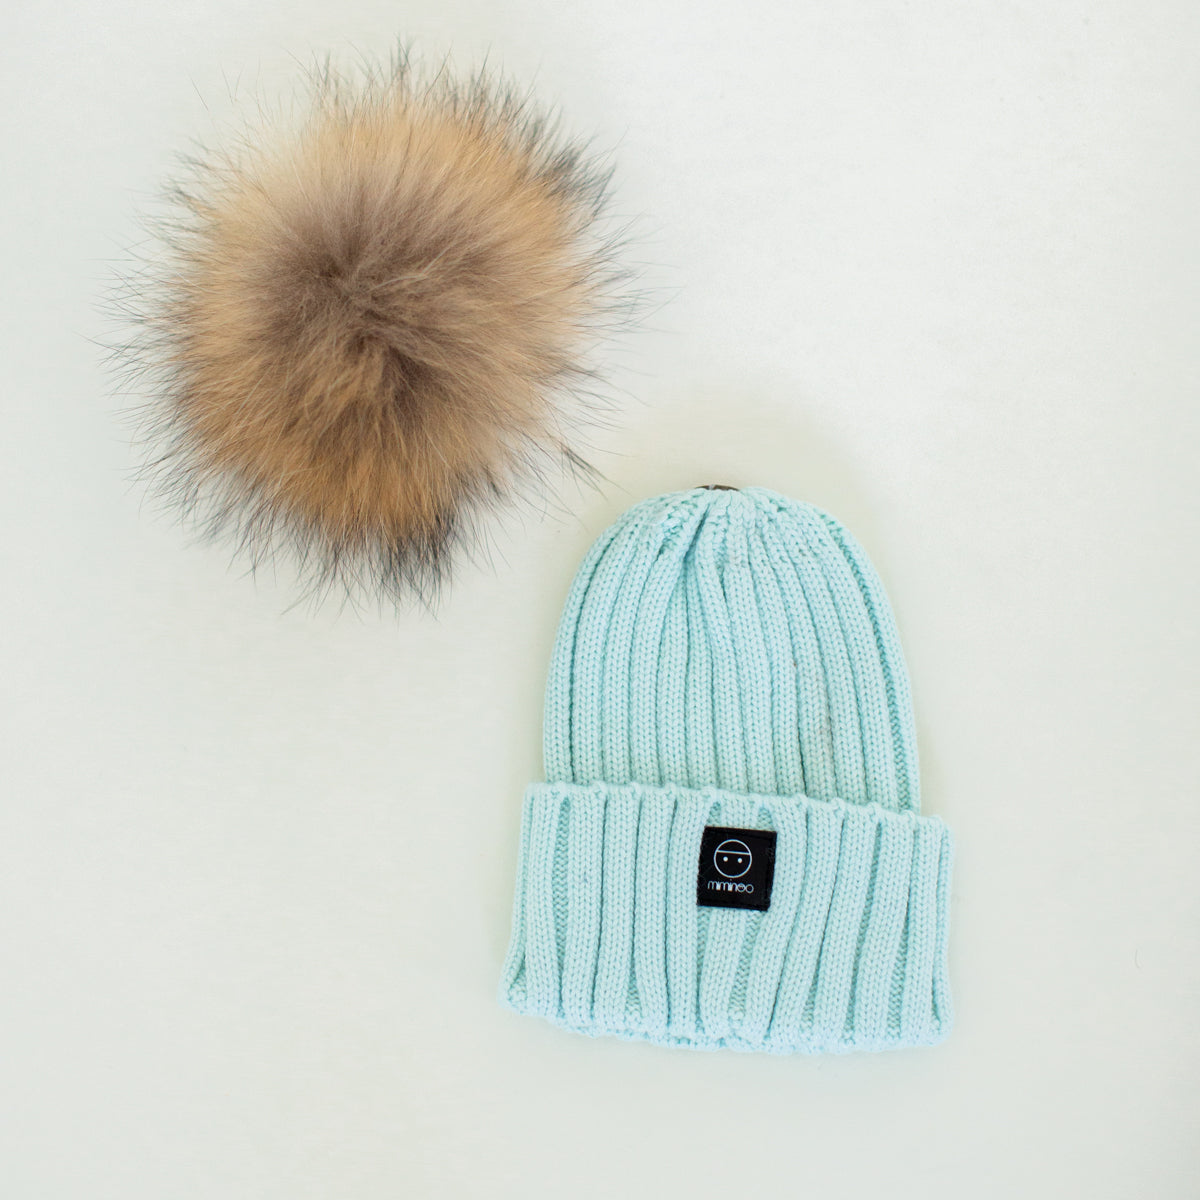 POM BEANIES FOR BABIES